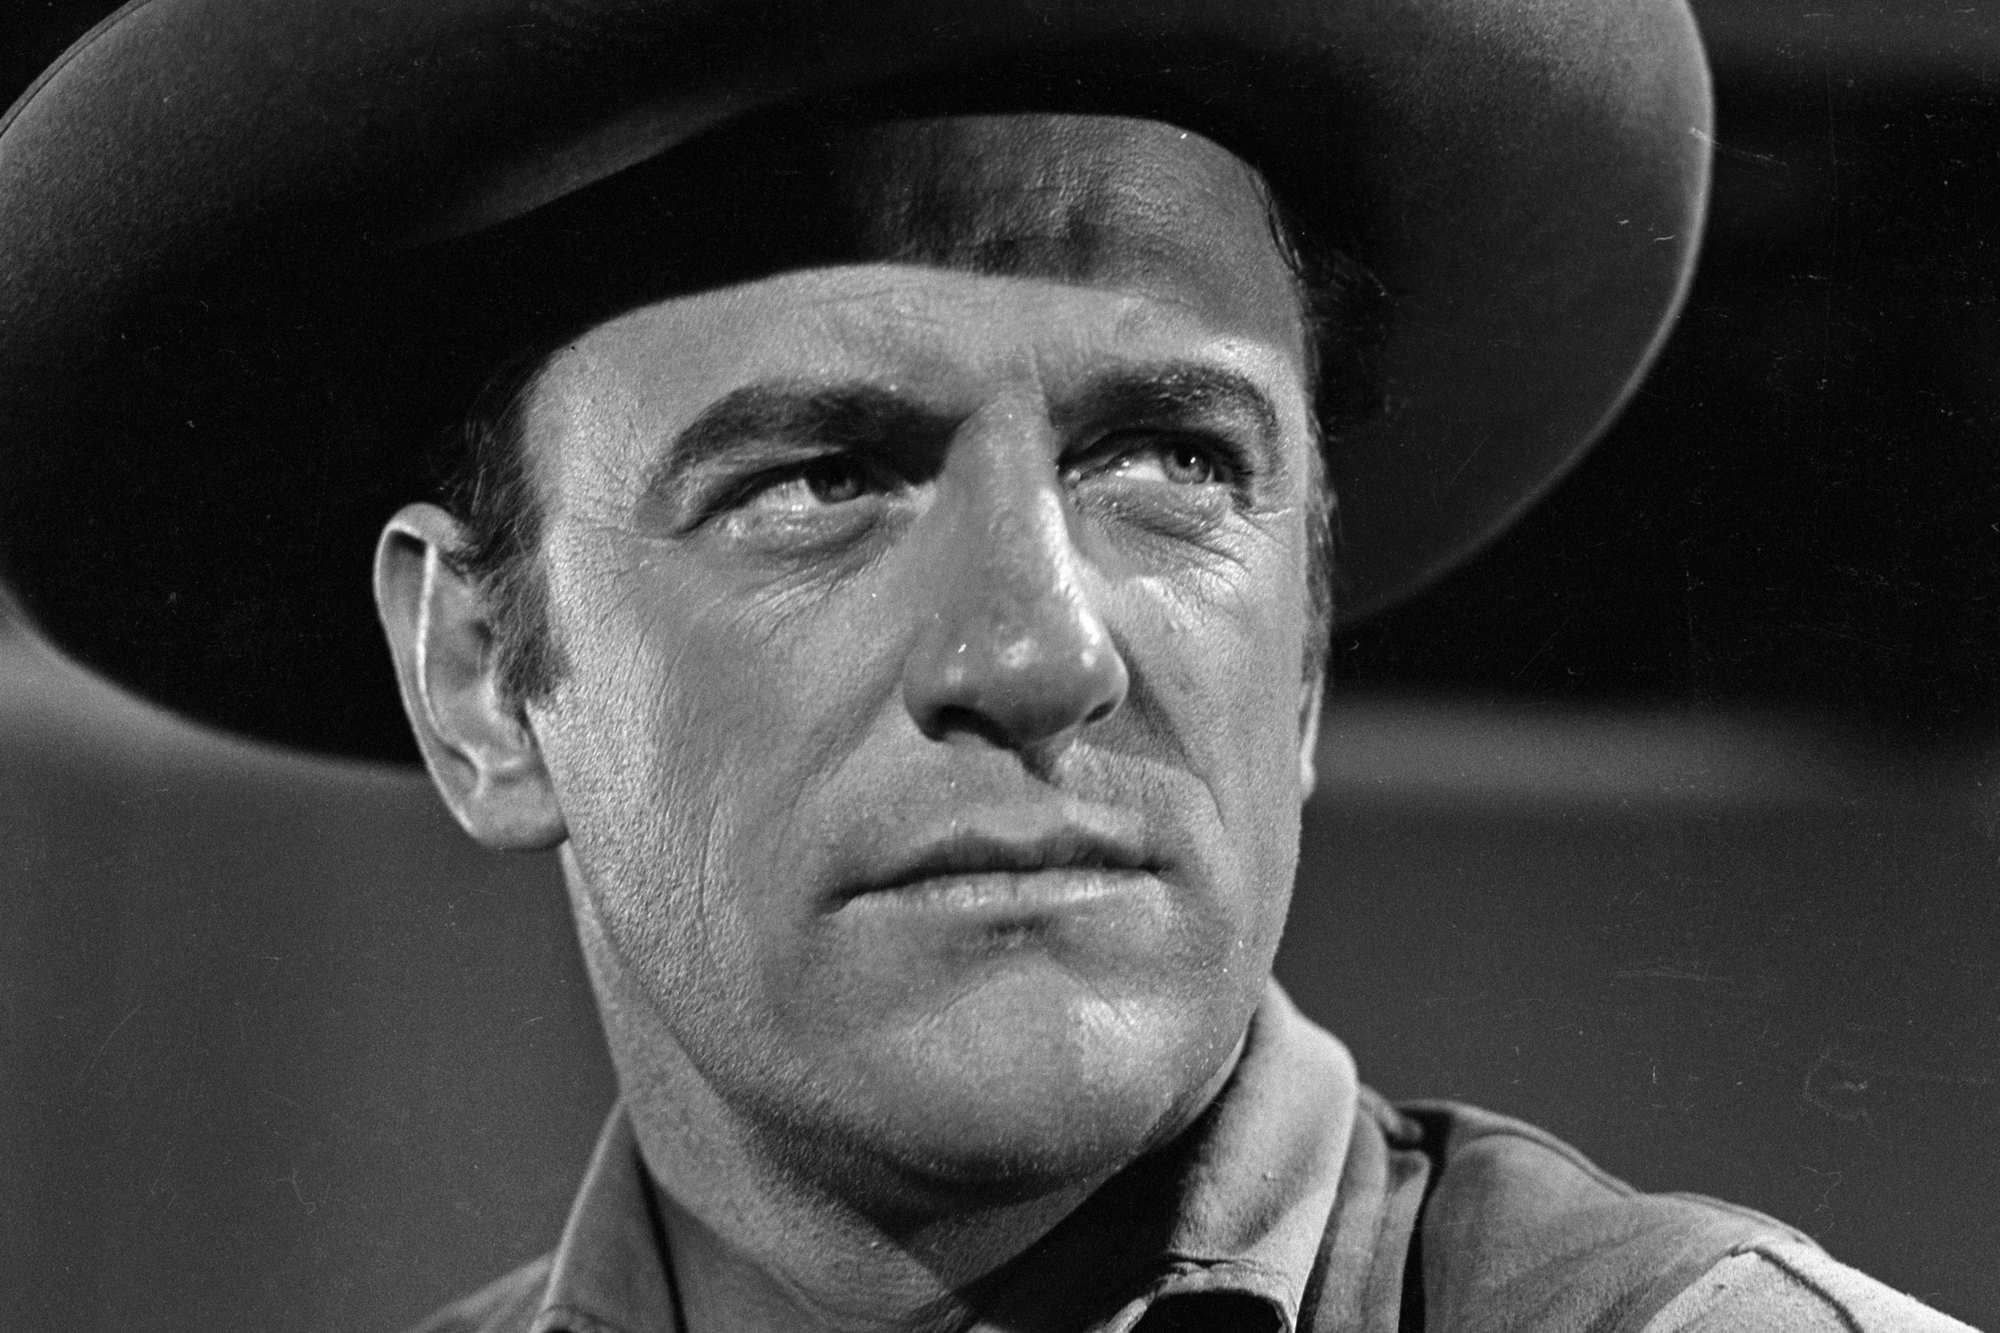 'Gunsmoke' James Arness as U.S. Marshal Matt Dillon looking up and to the side in a black-and-white picture.